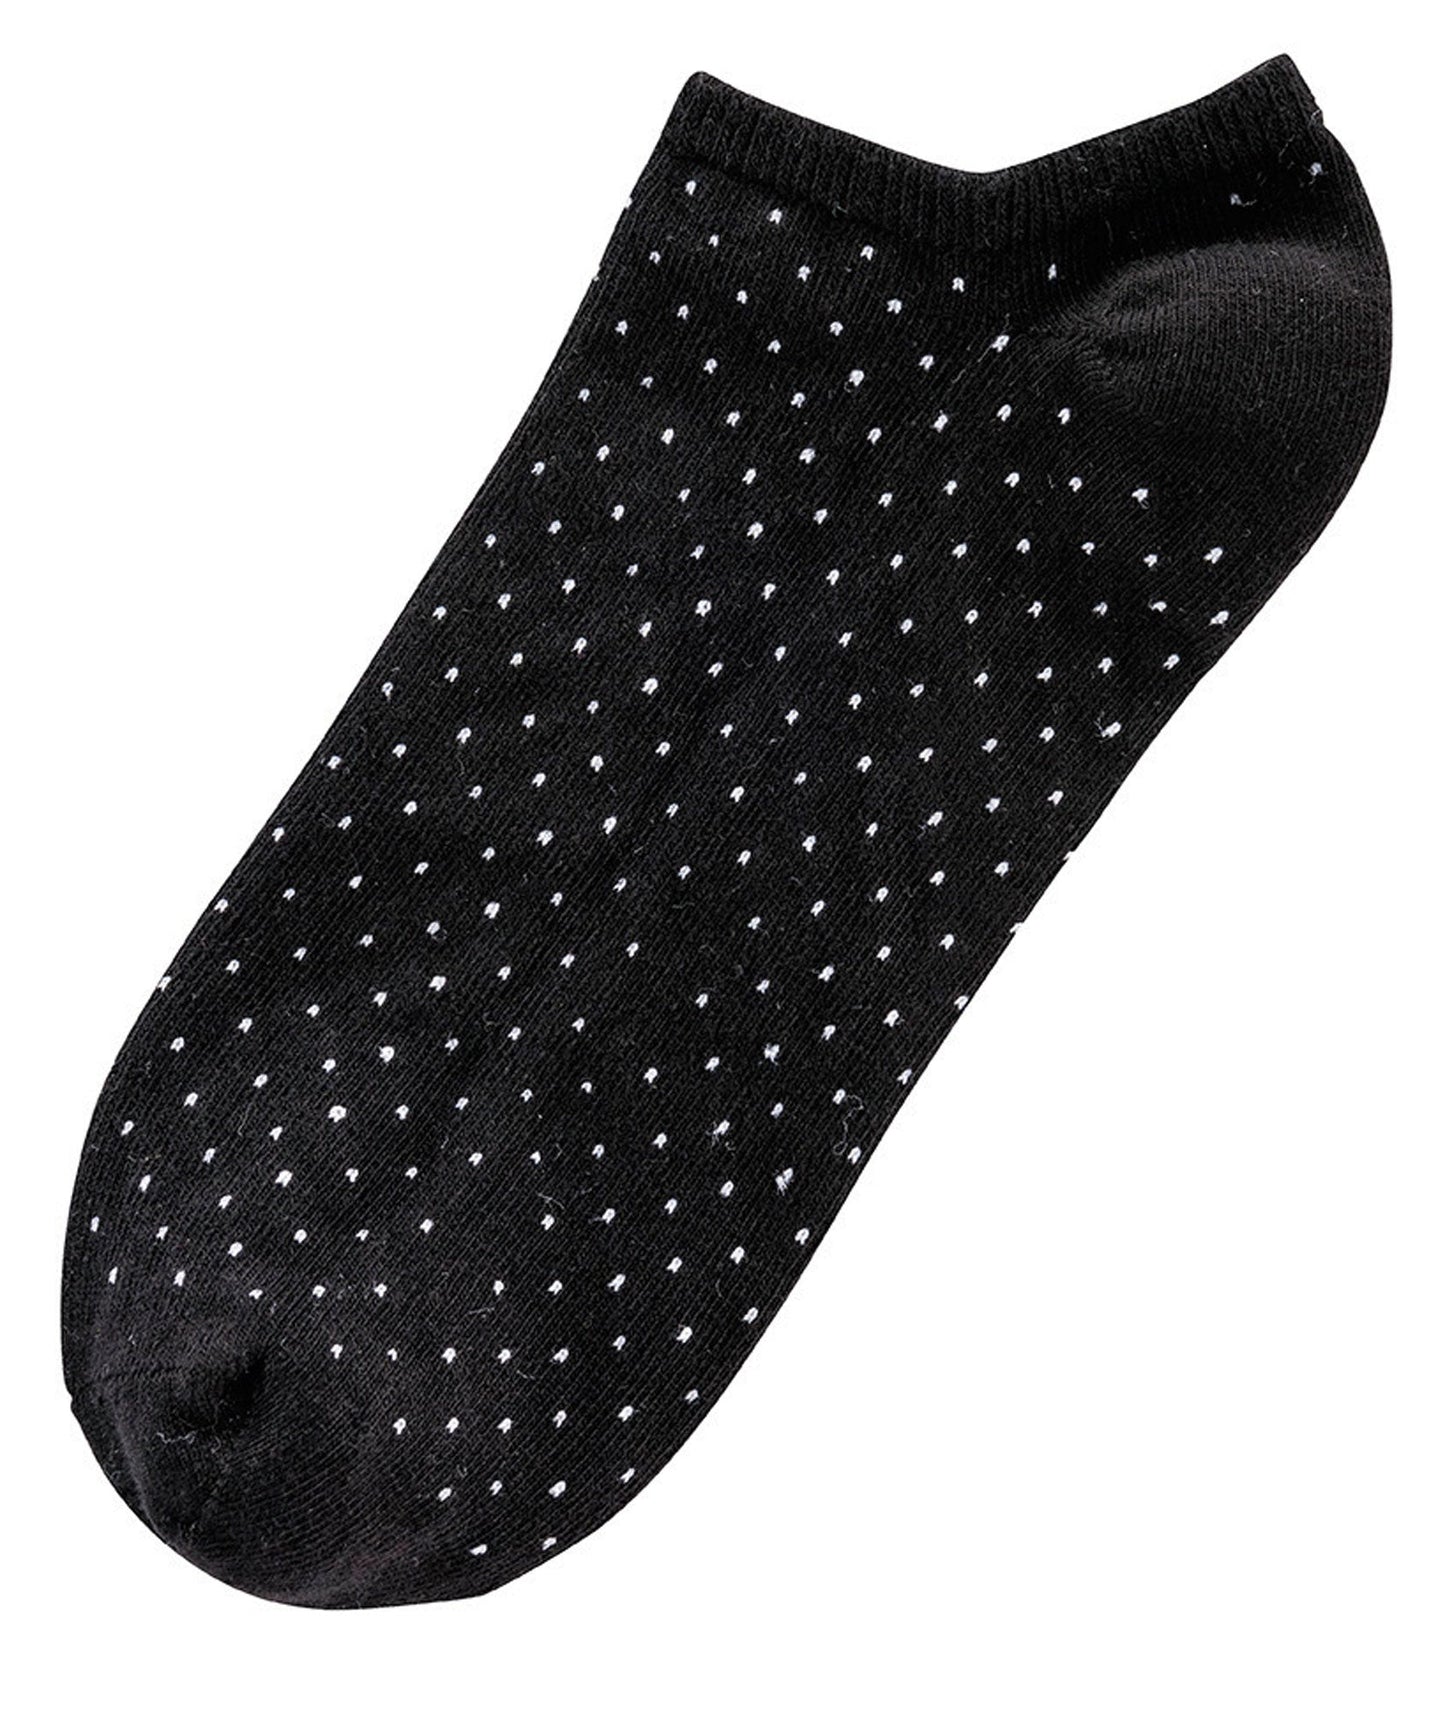 3 pairs of sneaker socks black&amp;white combed cotton black and white pattern